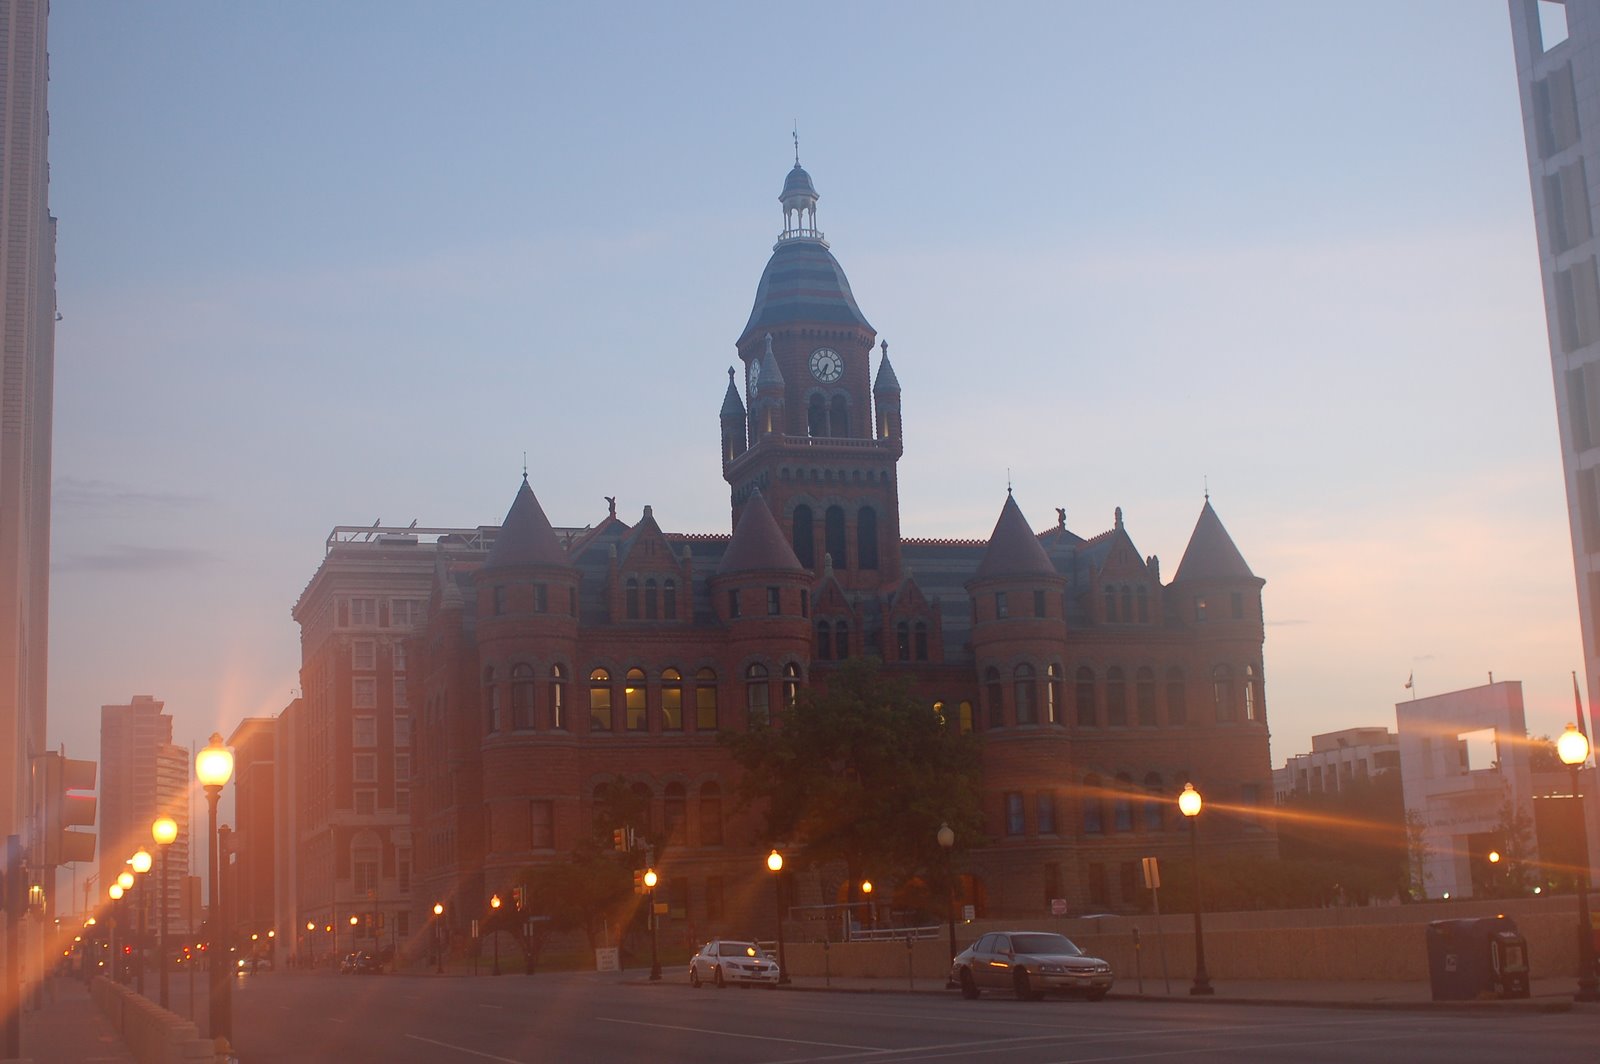 [Foggy+Old+Red+Courthouse.JPG]